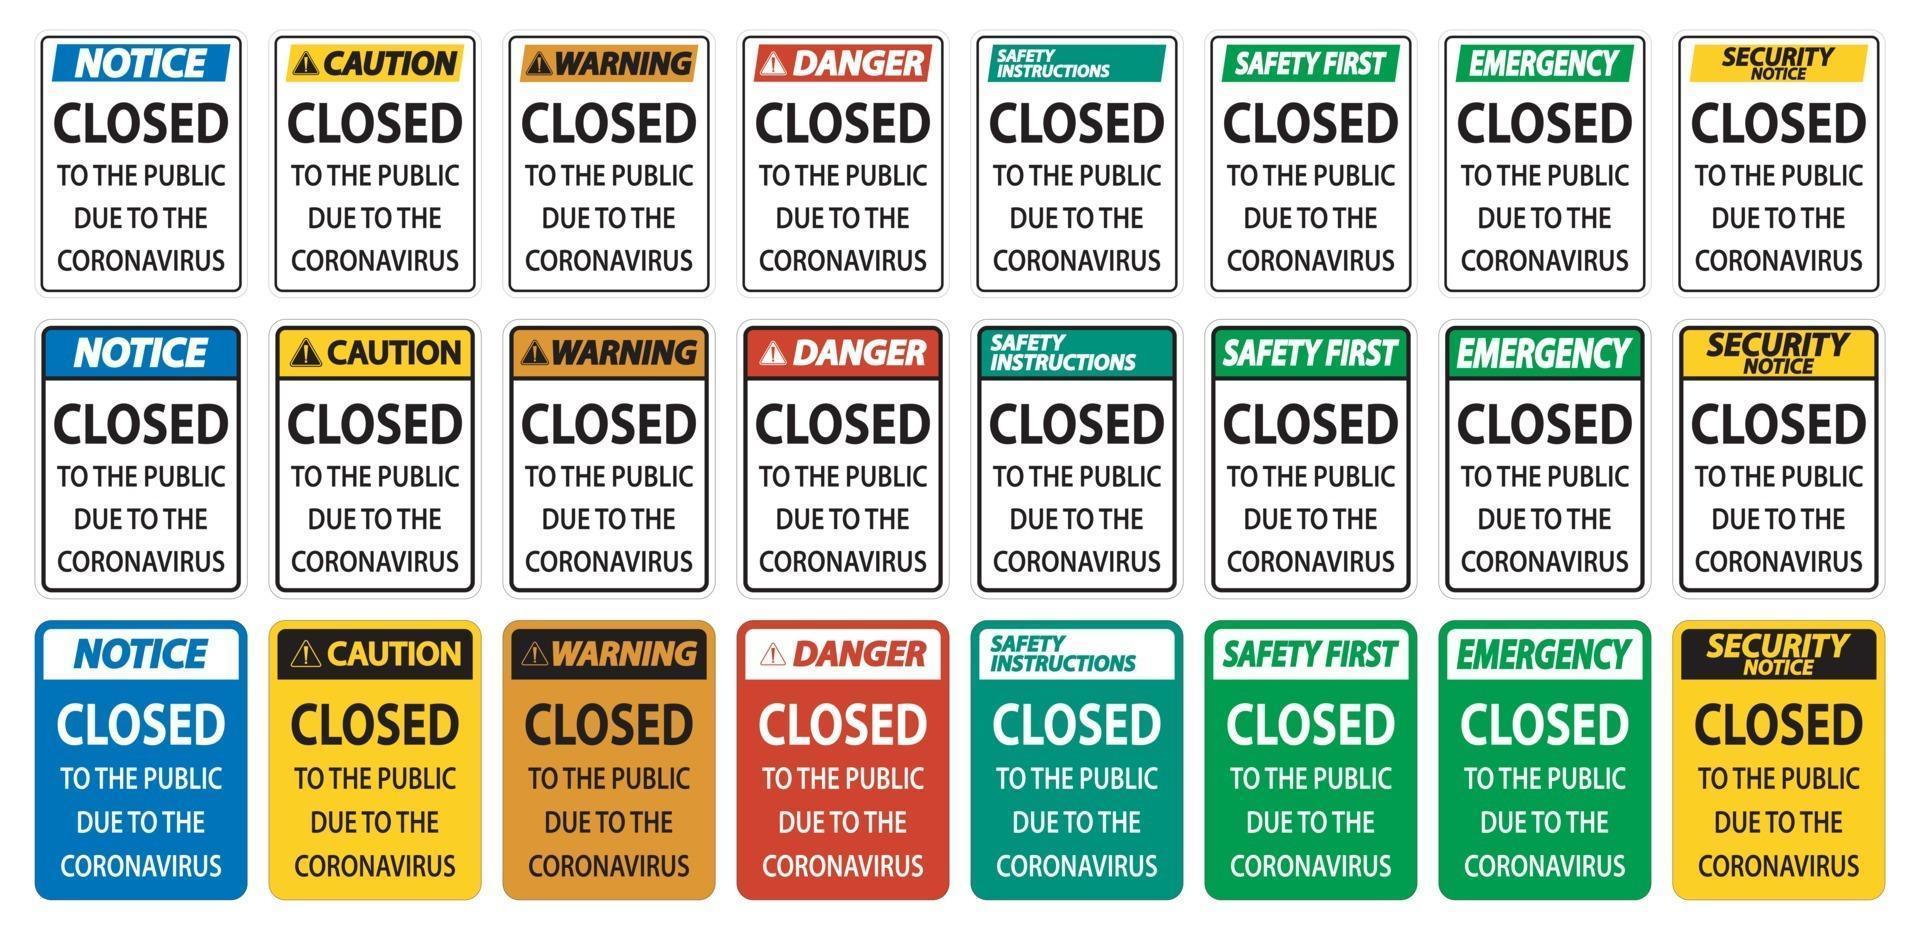 Closed to public sign on white background vector